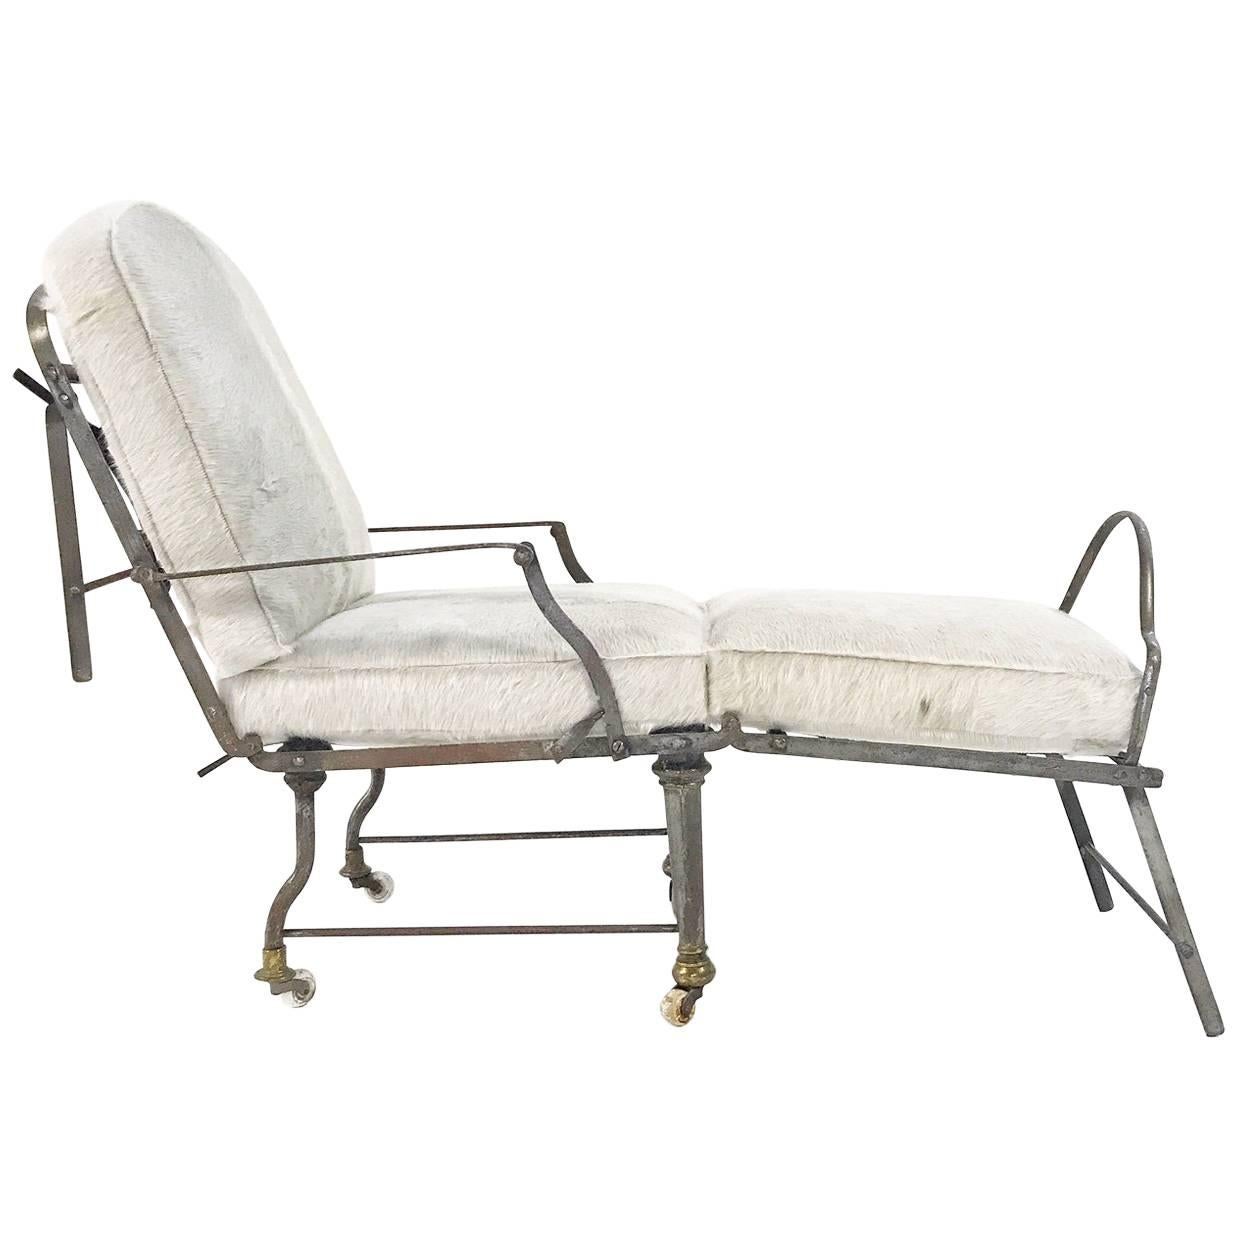 Antique French Metal Campaign Chaise Chair with Custom Brazilian Cowhide Cushion For Sale